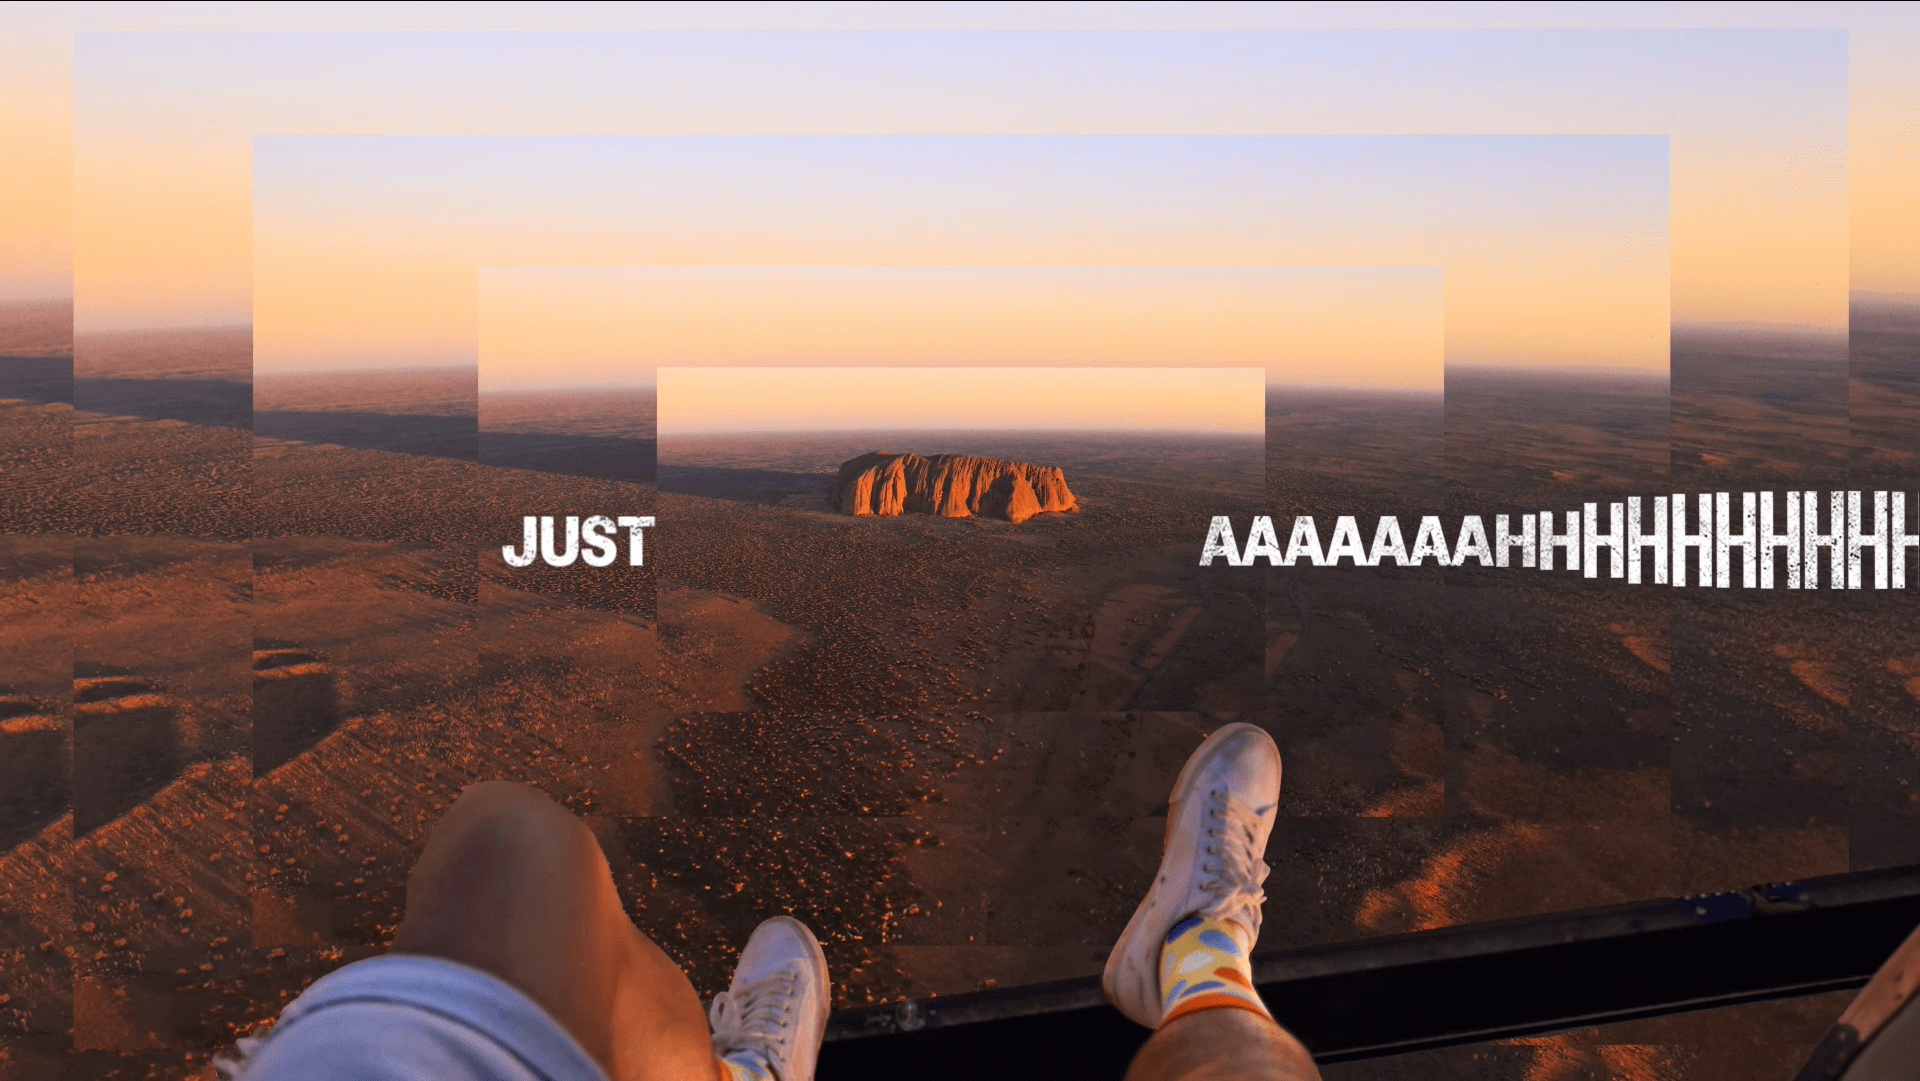 Voyages 'Just Wow' Uluru Ayers Rock Resort campaign featuring a first person high shot of Uluru with their feet dangling in the shot